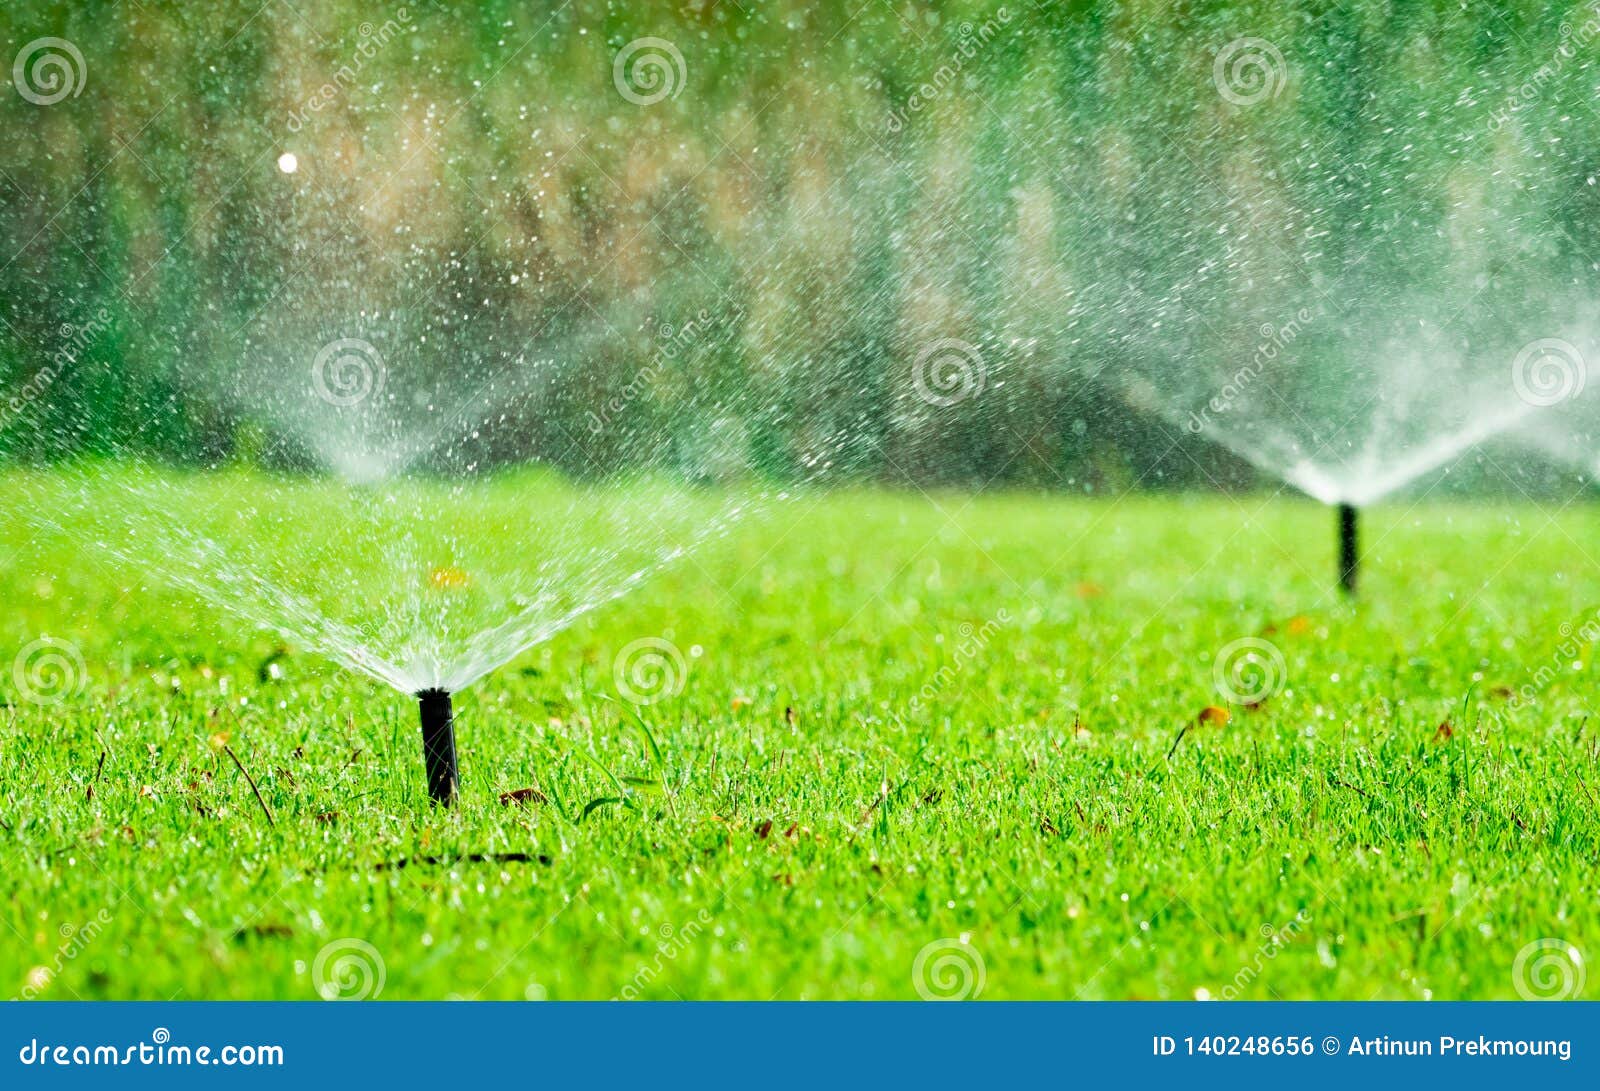 Automatic Lawn Sprinkler Watering Green Grass Sprinkler With